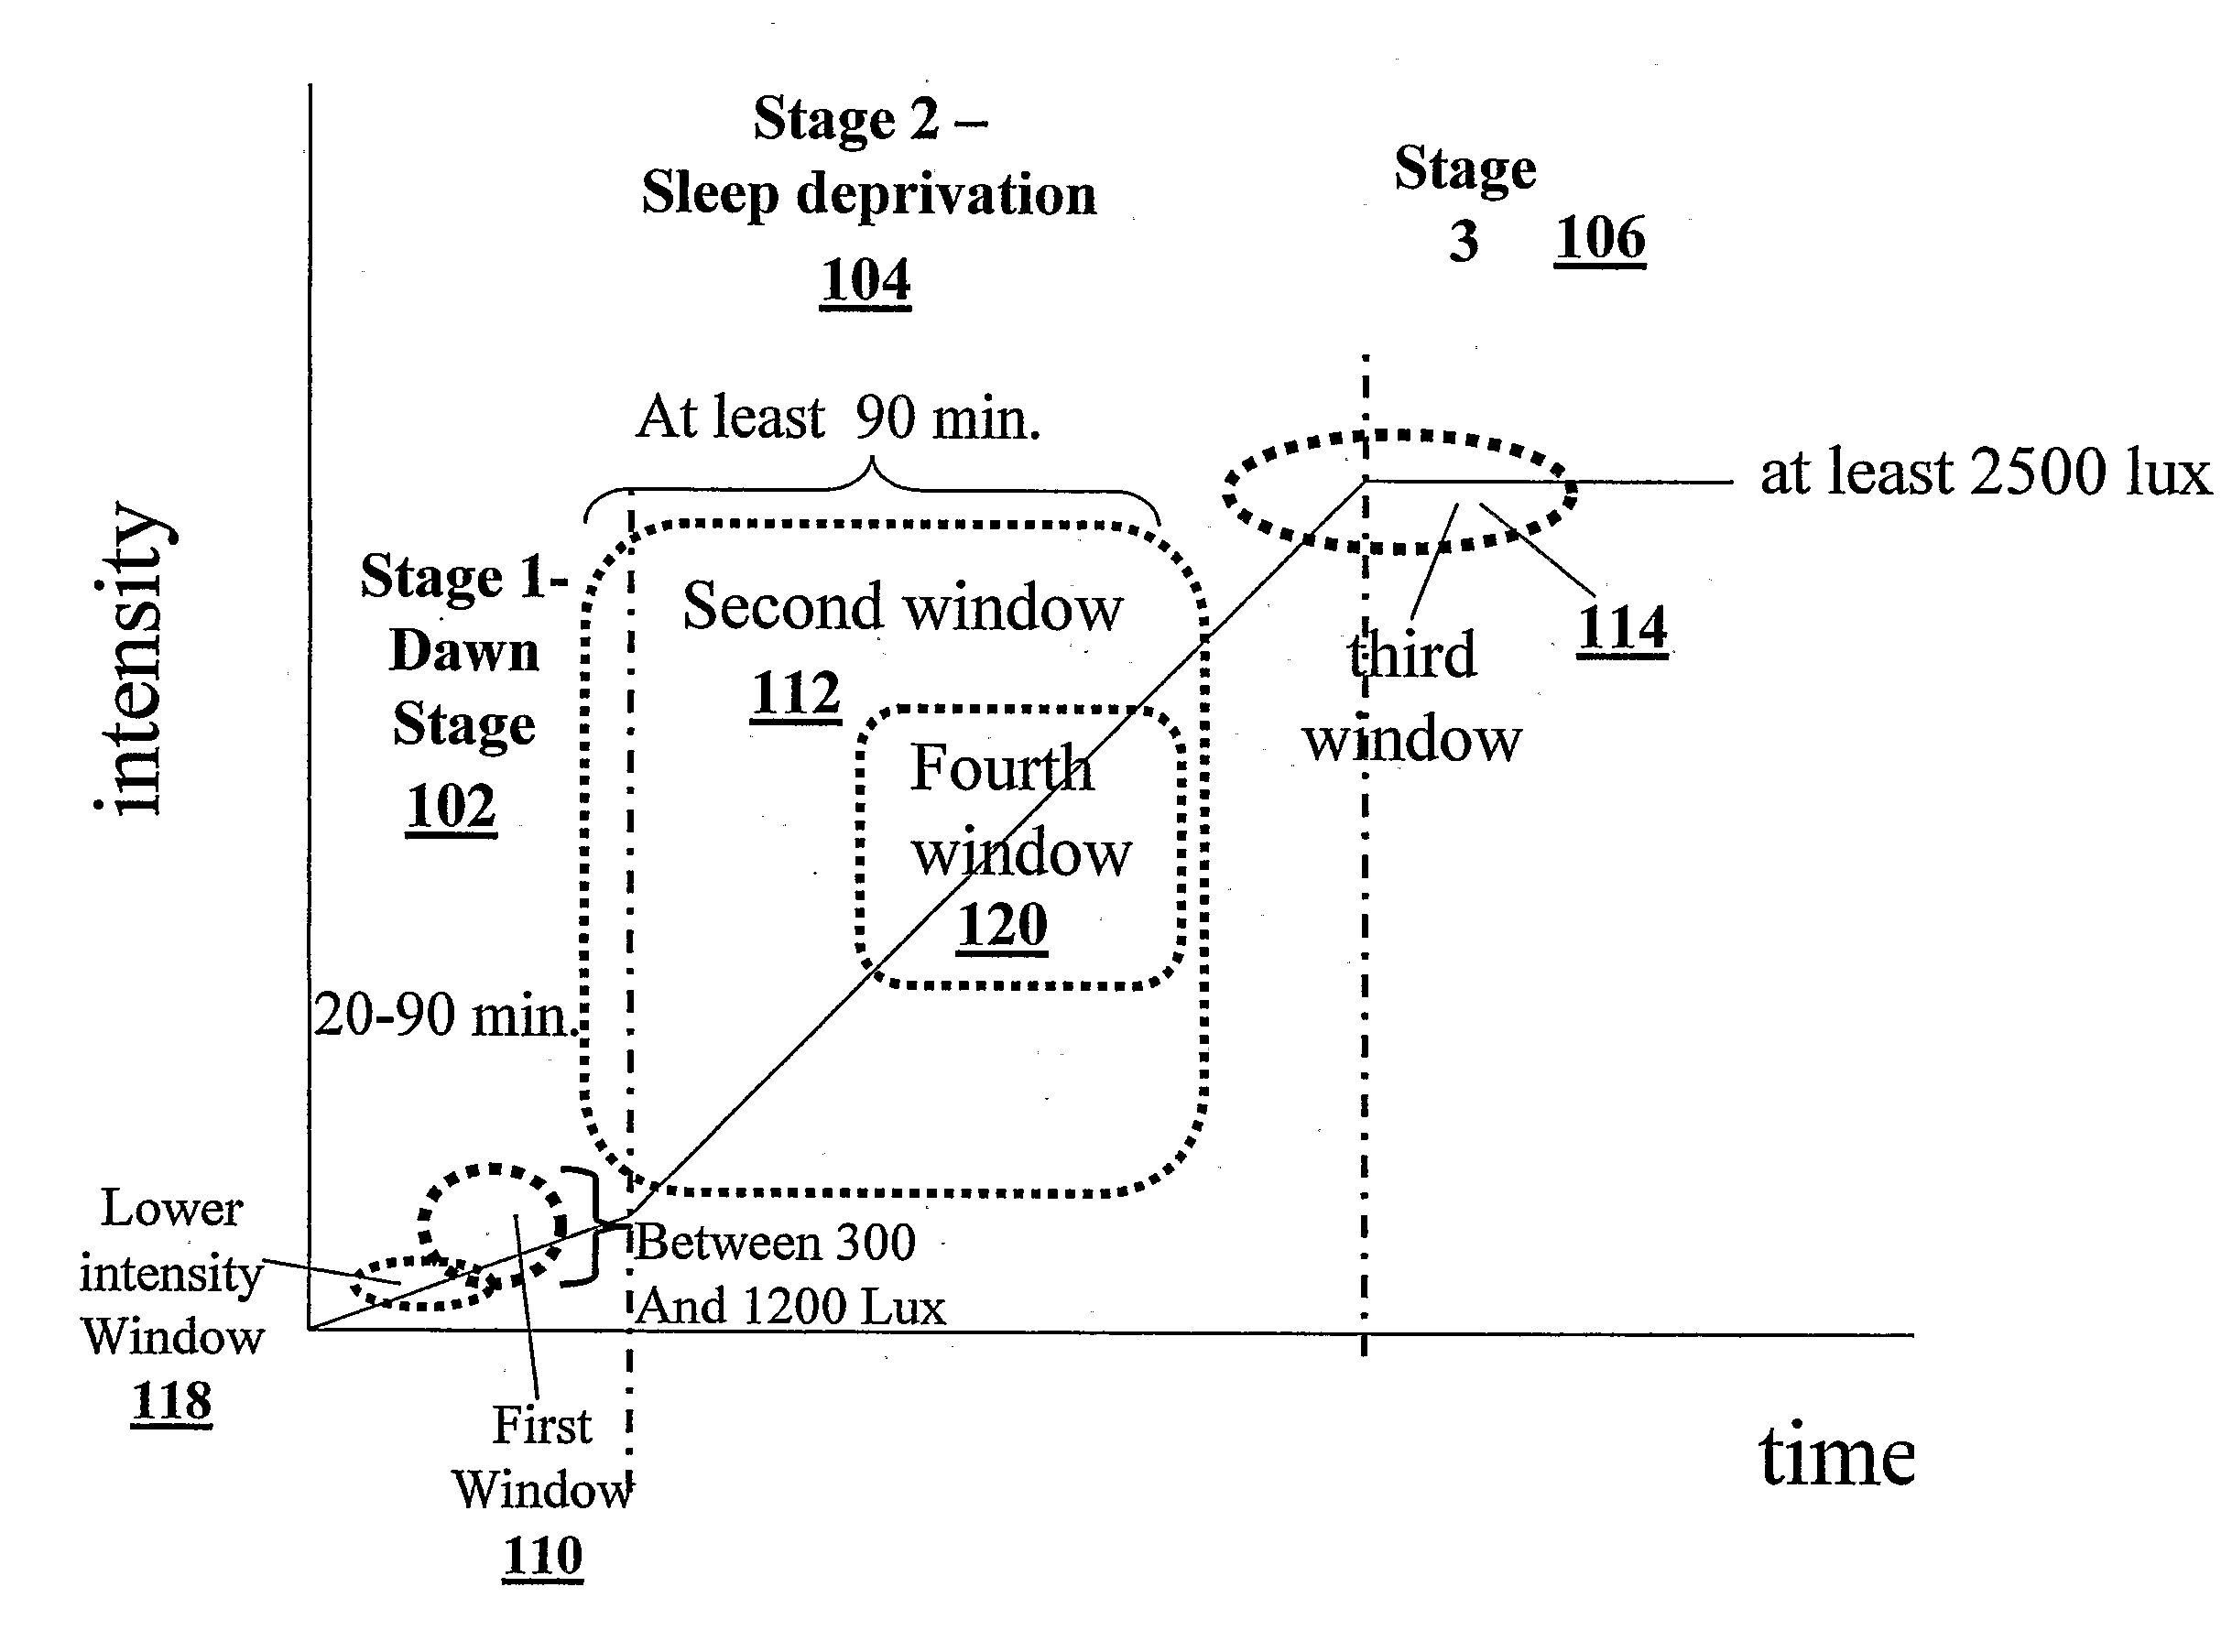 Apparatus and Method for Providing a Multi-Stage Light Treatment